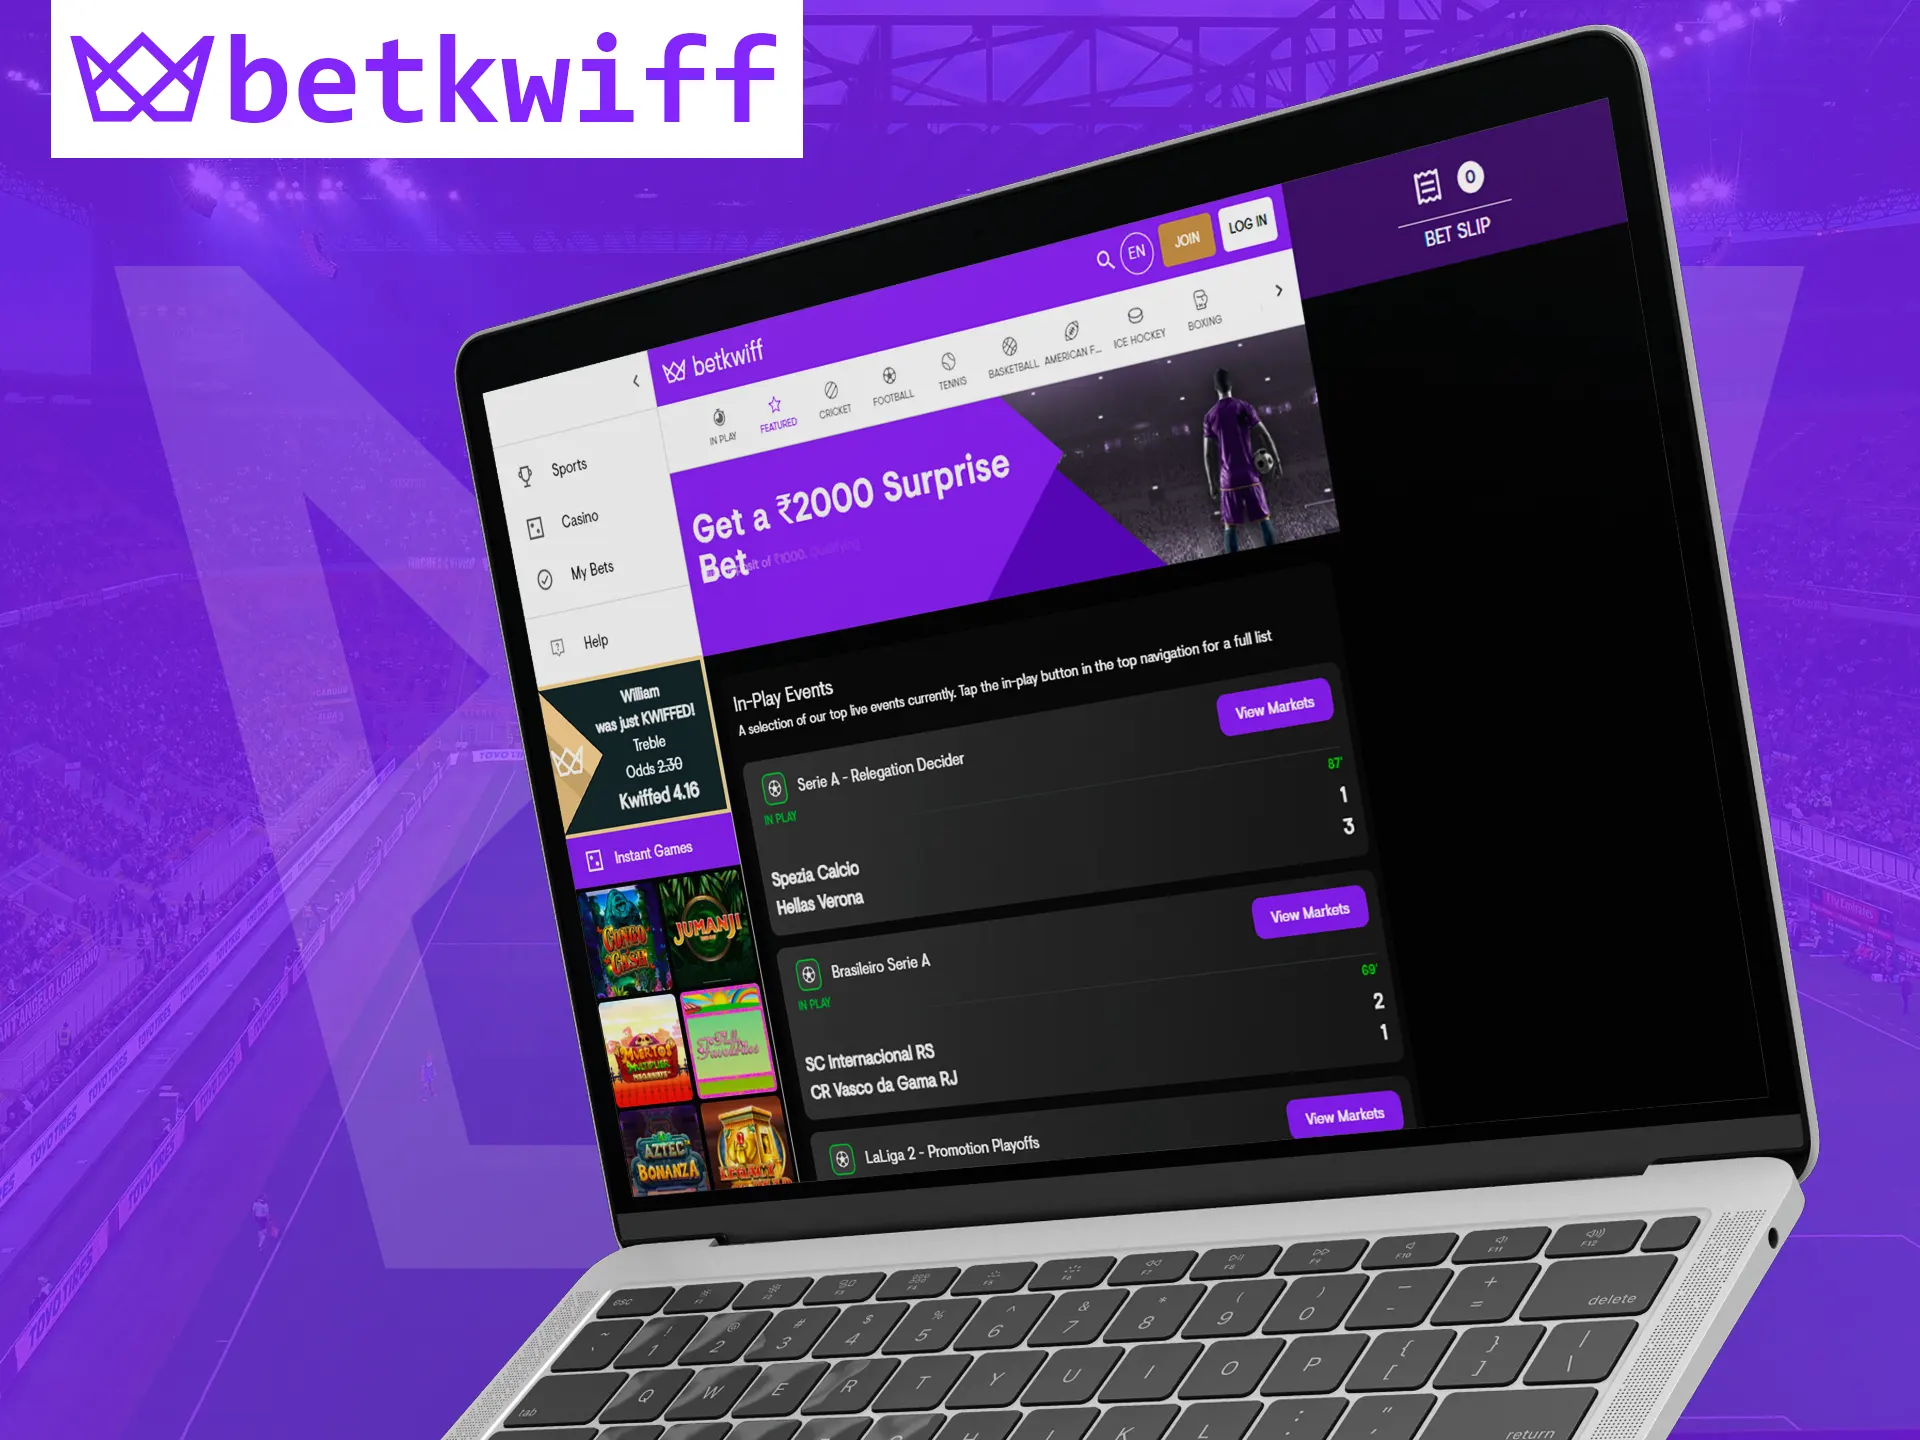 Visit the official Betkwiff website.